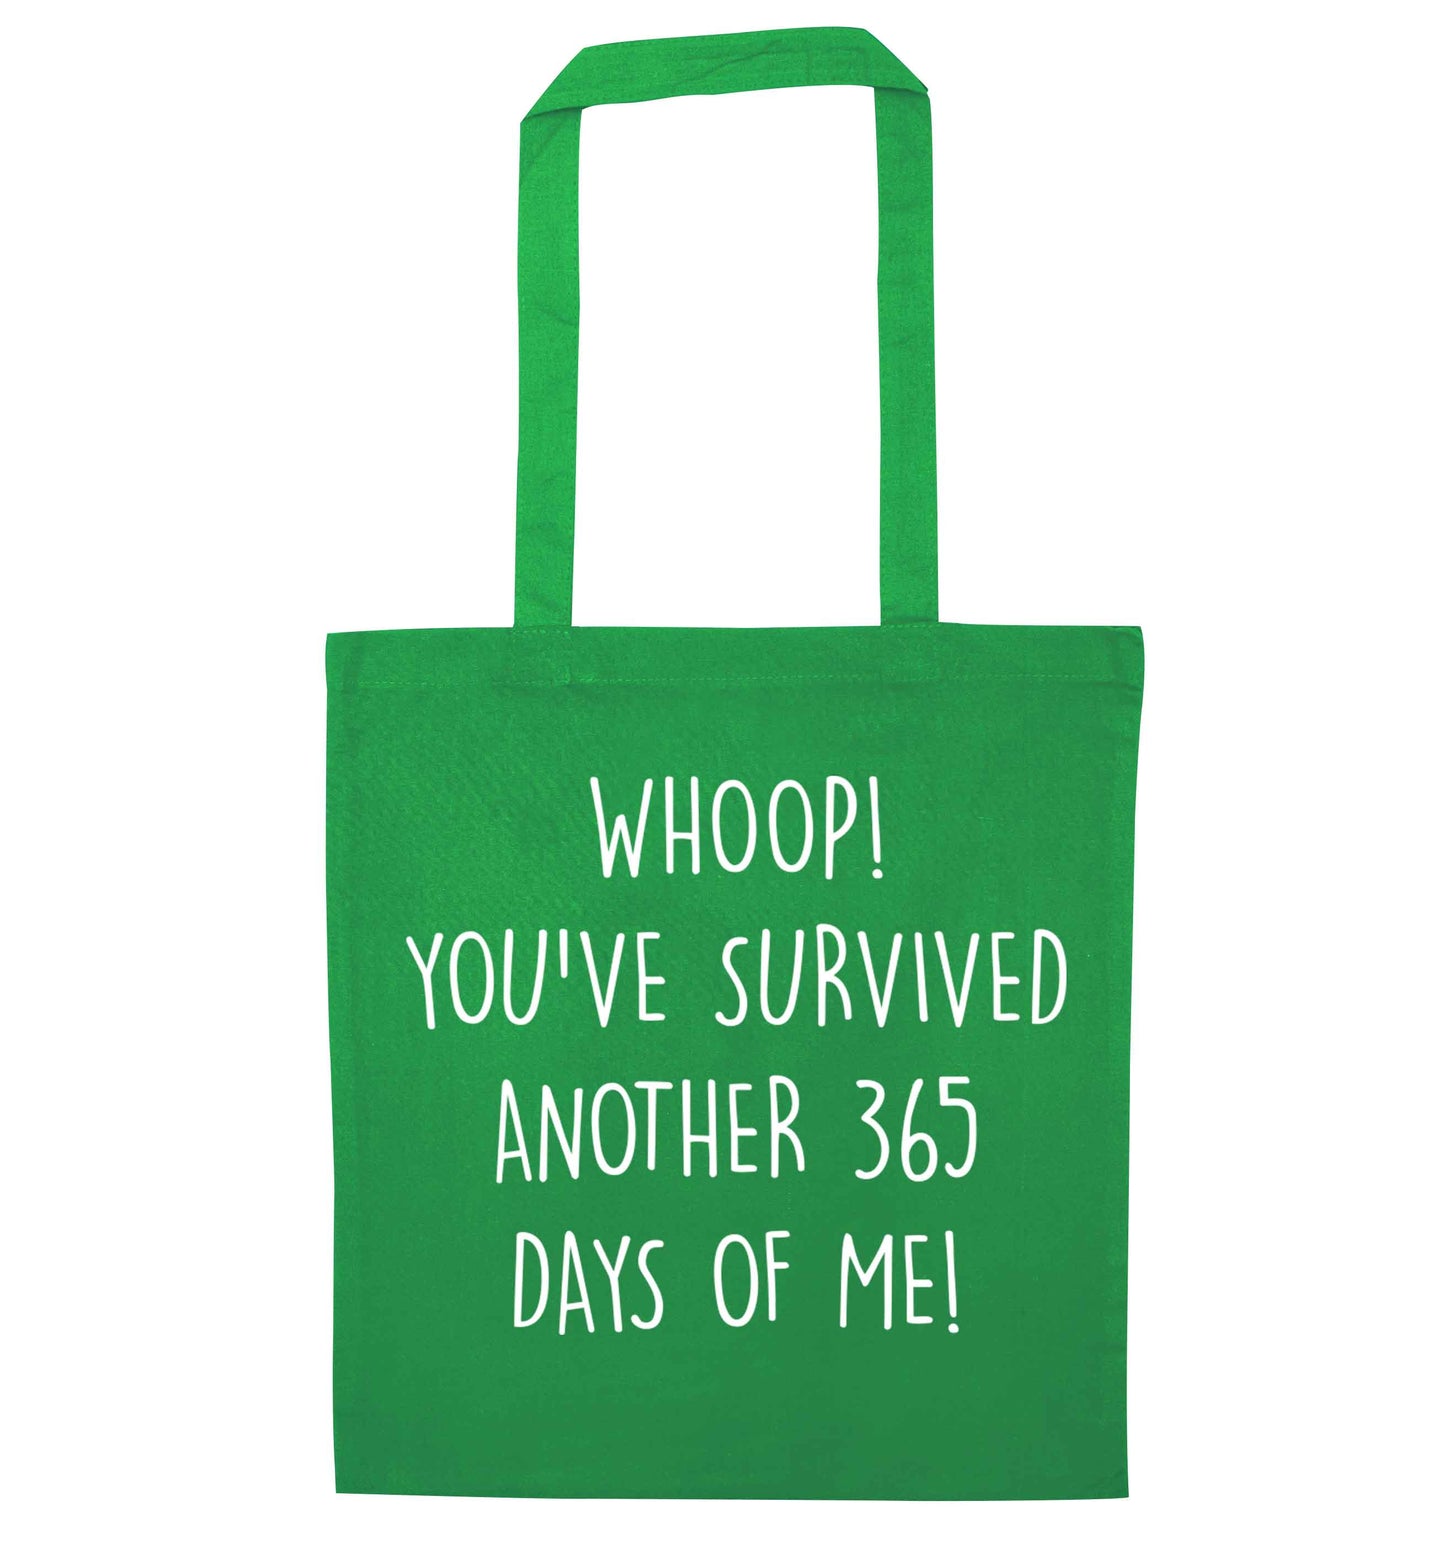 Whoop! You've survived another 365 days with me! green tote bag